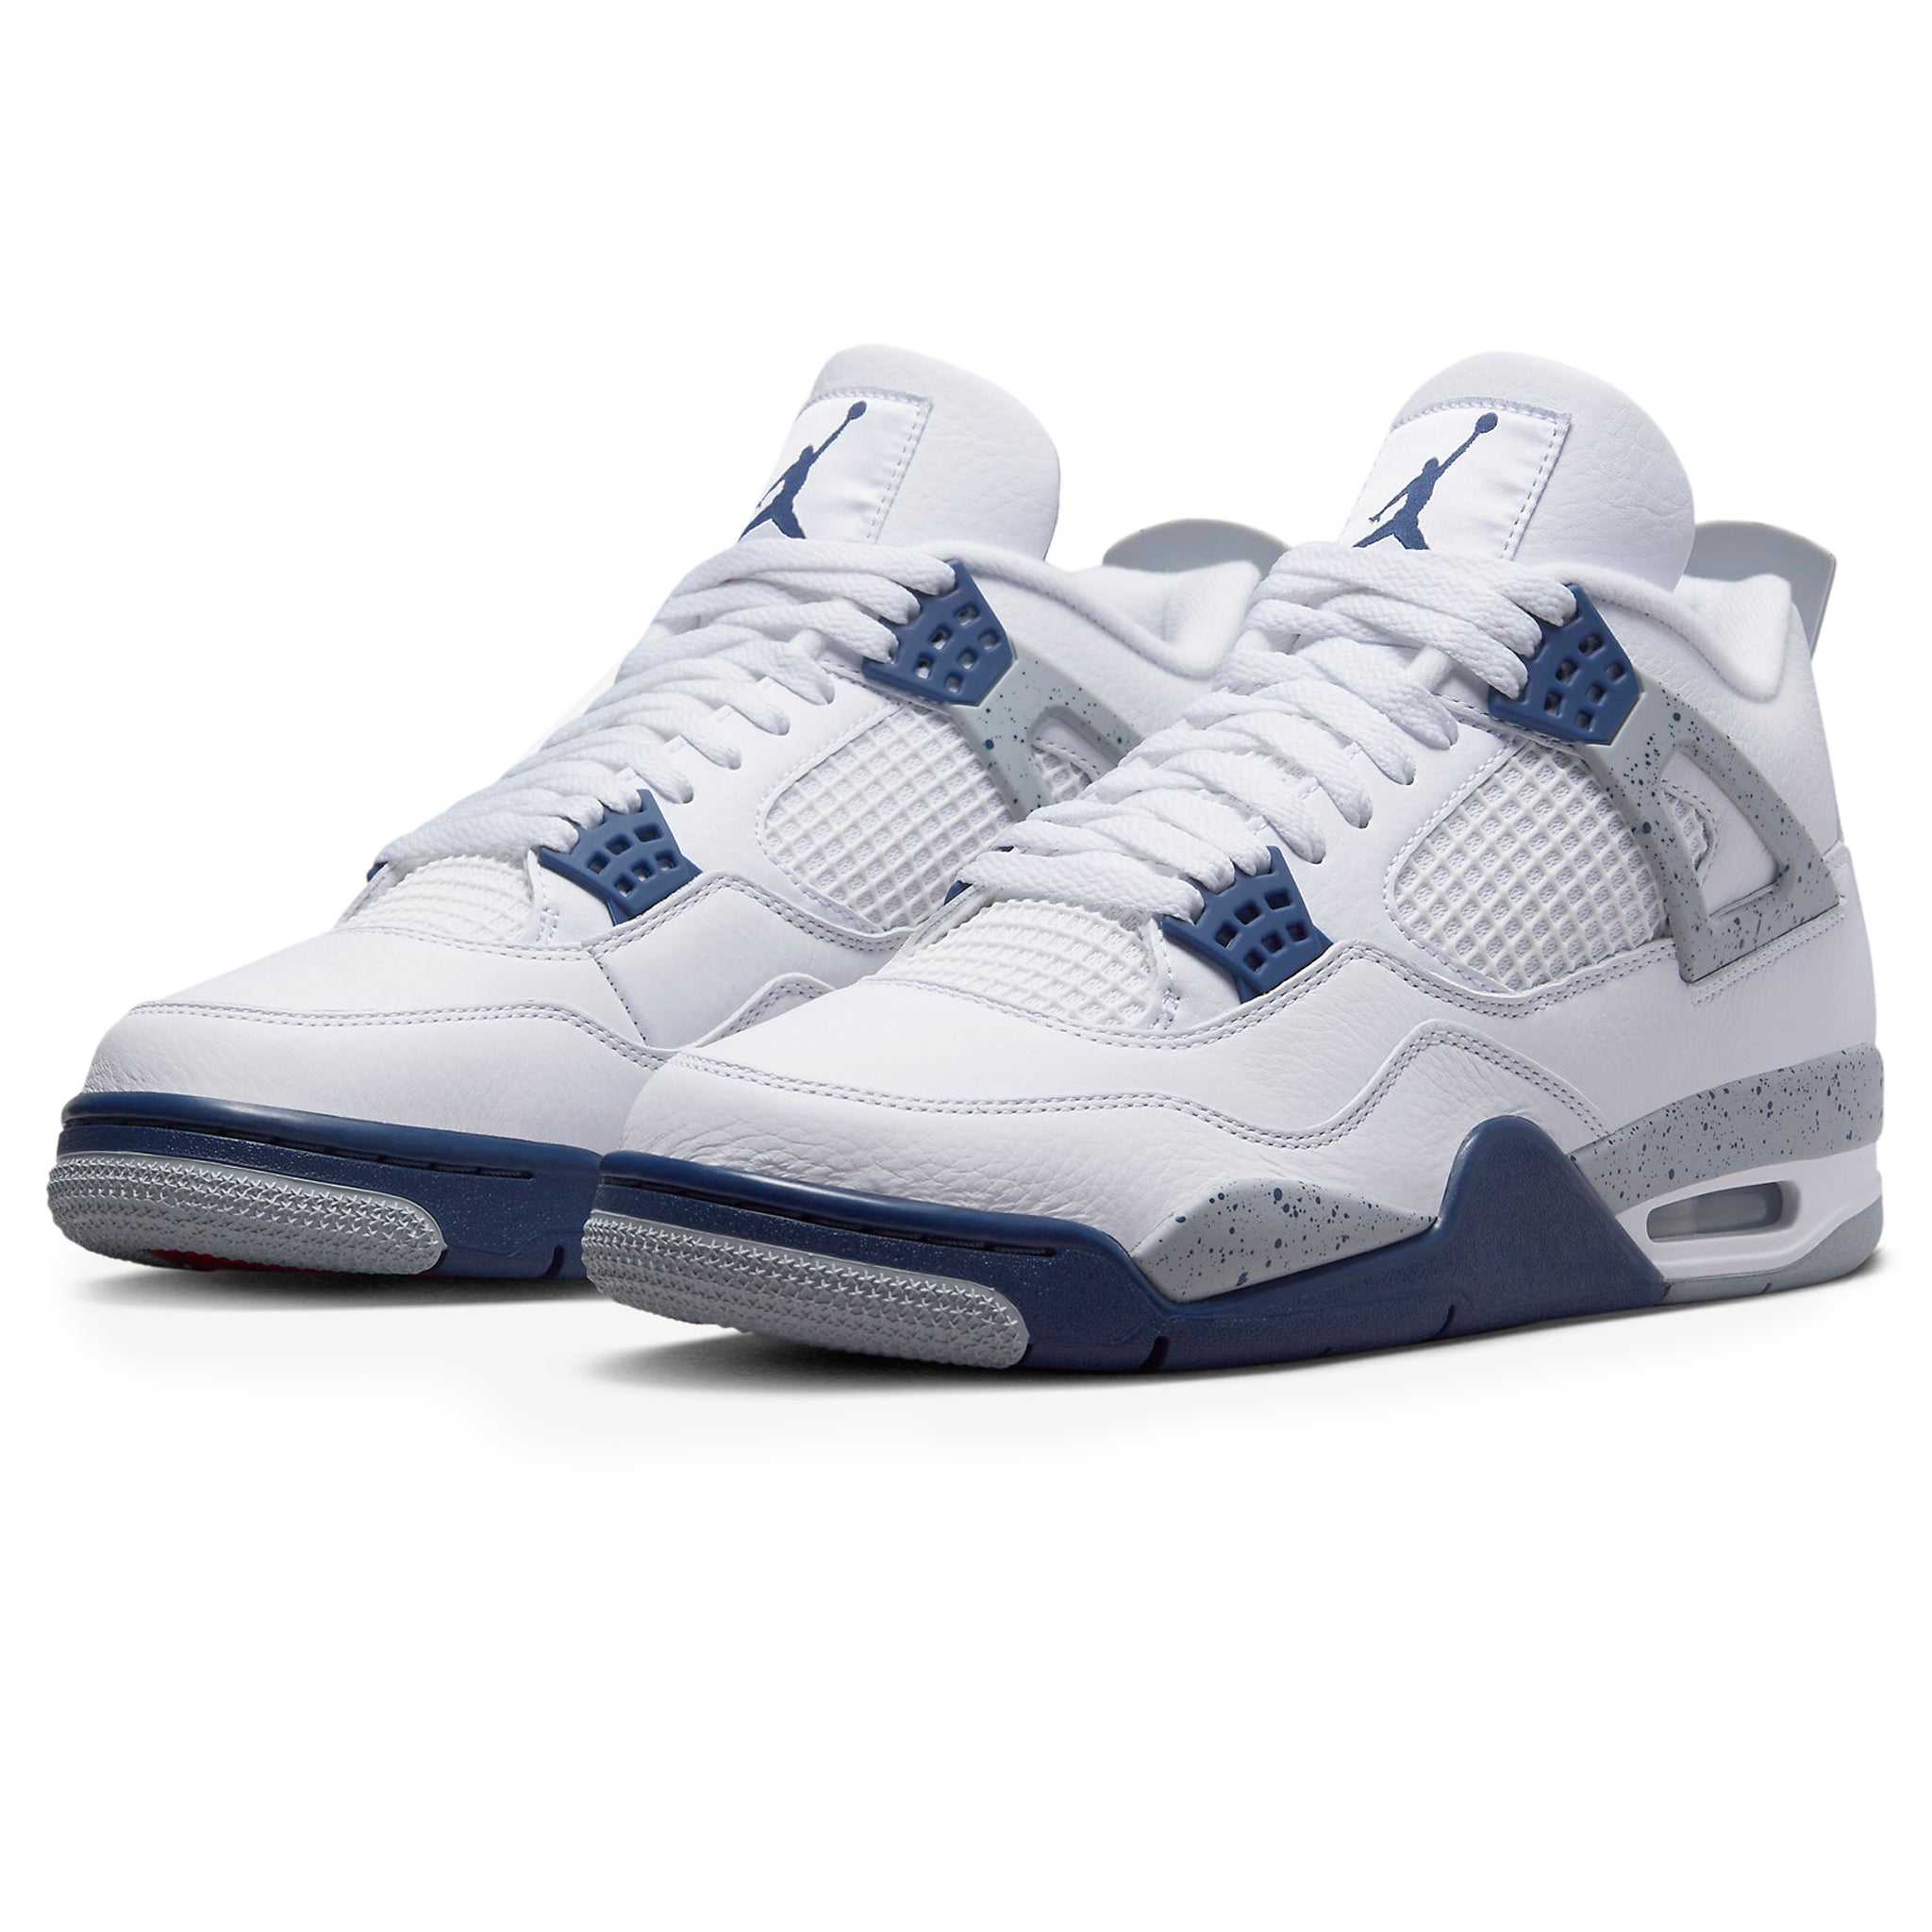 Front side view of Air Jordan 4 Retro Midnight Navy DH6927-140